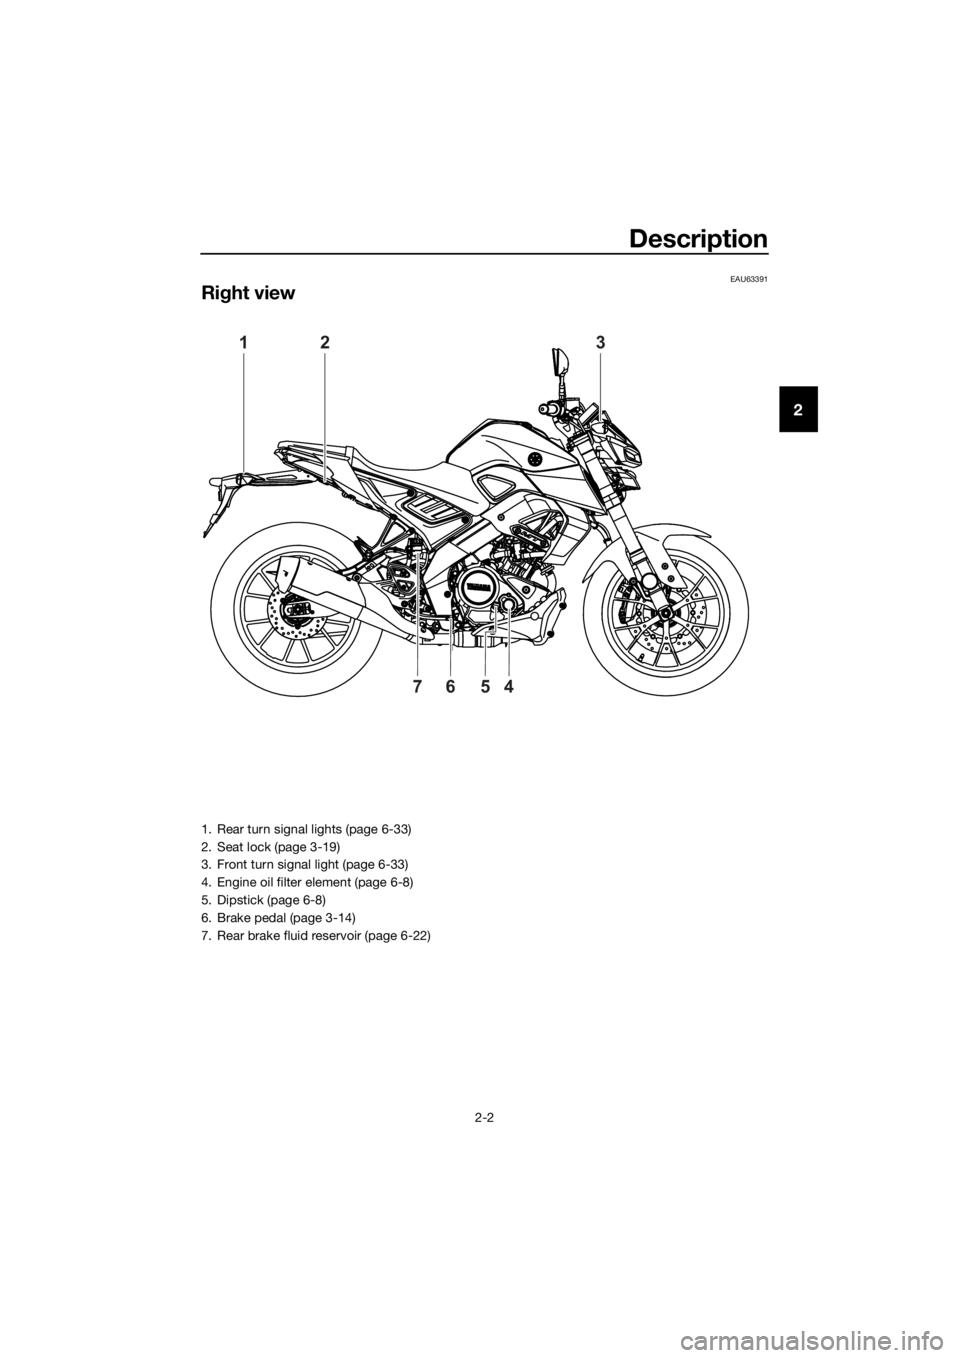 YAMAHA MT-125 2020  Owners Manual Description
2-2
2
EAU63391
Right view
123
4567
1. Rear turn signal lights (page 6-33)
2. Seat lock (page 3-19)
3. Front turn signal light (page 6-33)
4. Engine oil filter element (page 6-8)
5. Dipstic